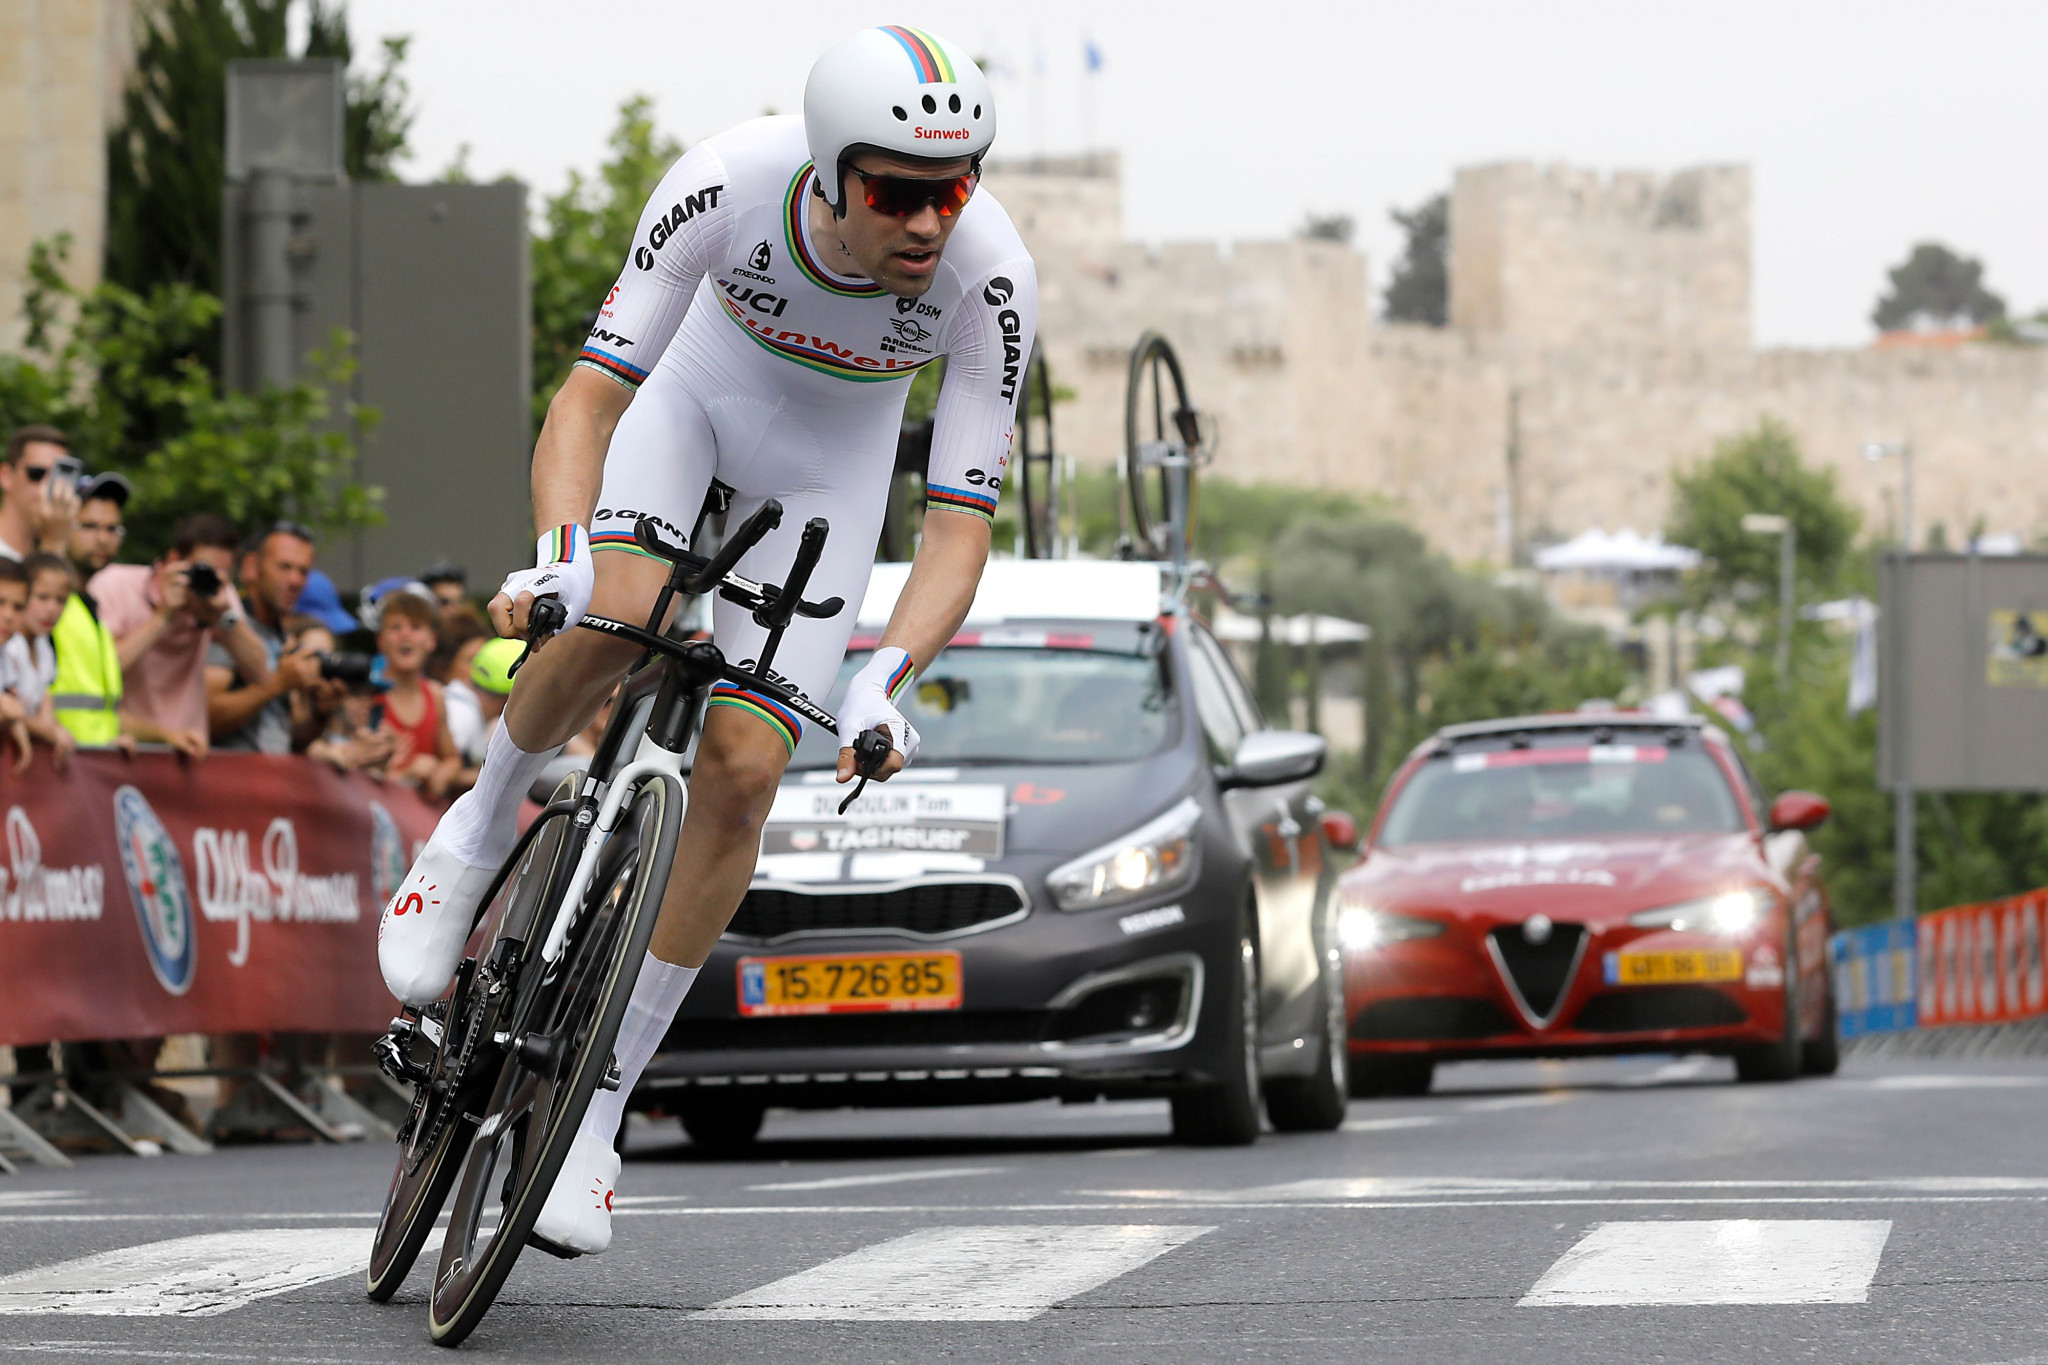 Dumoulin triumphs in opening time trial to make early gains on Giro d'Italia rivals